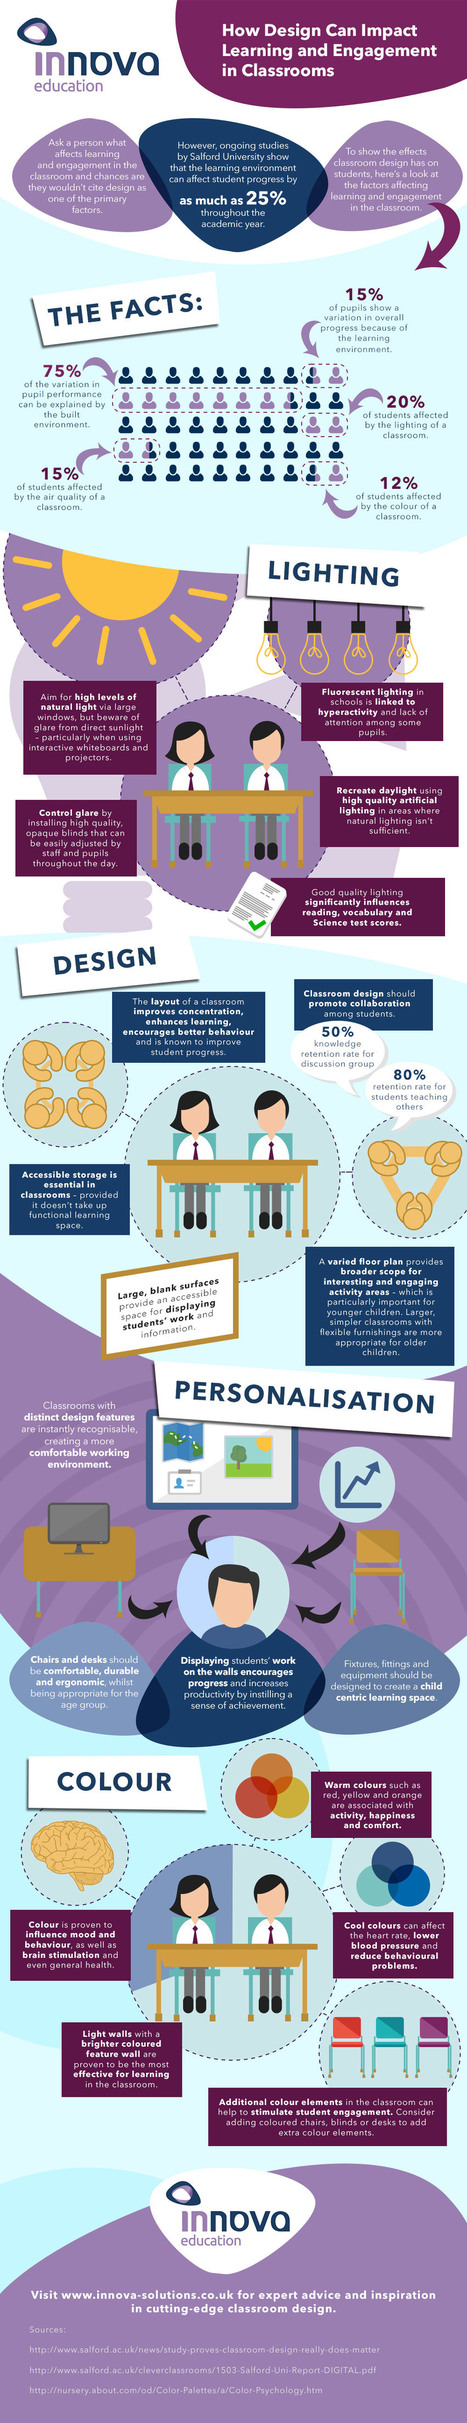 How Classroom Design Impacts Learning and Engagement Infographic | E-Learning-Inclusivo (Mashup) | Scoop.it